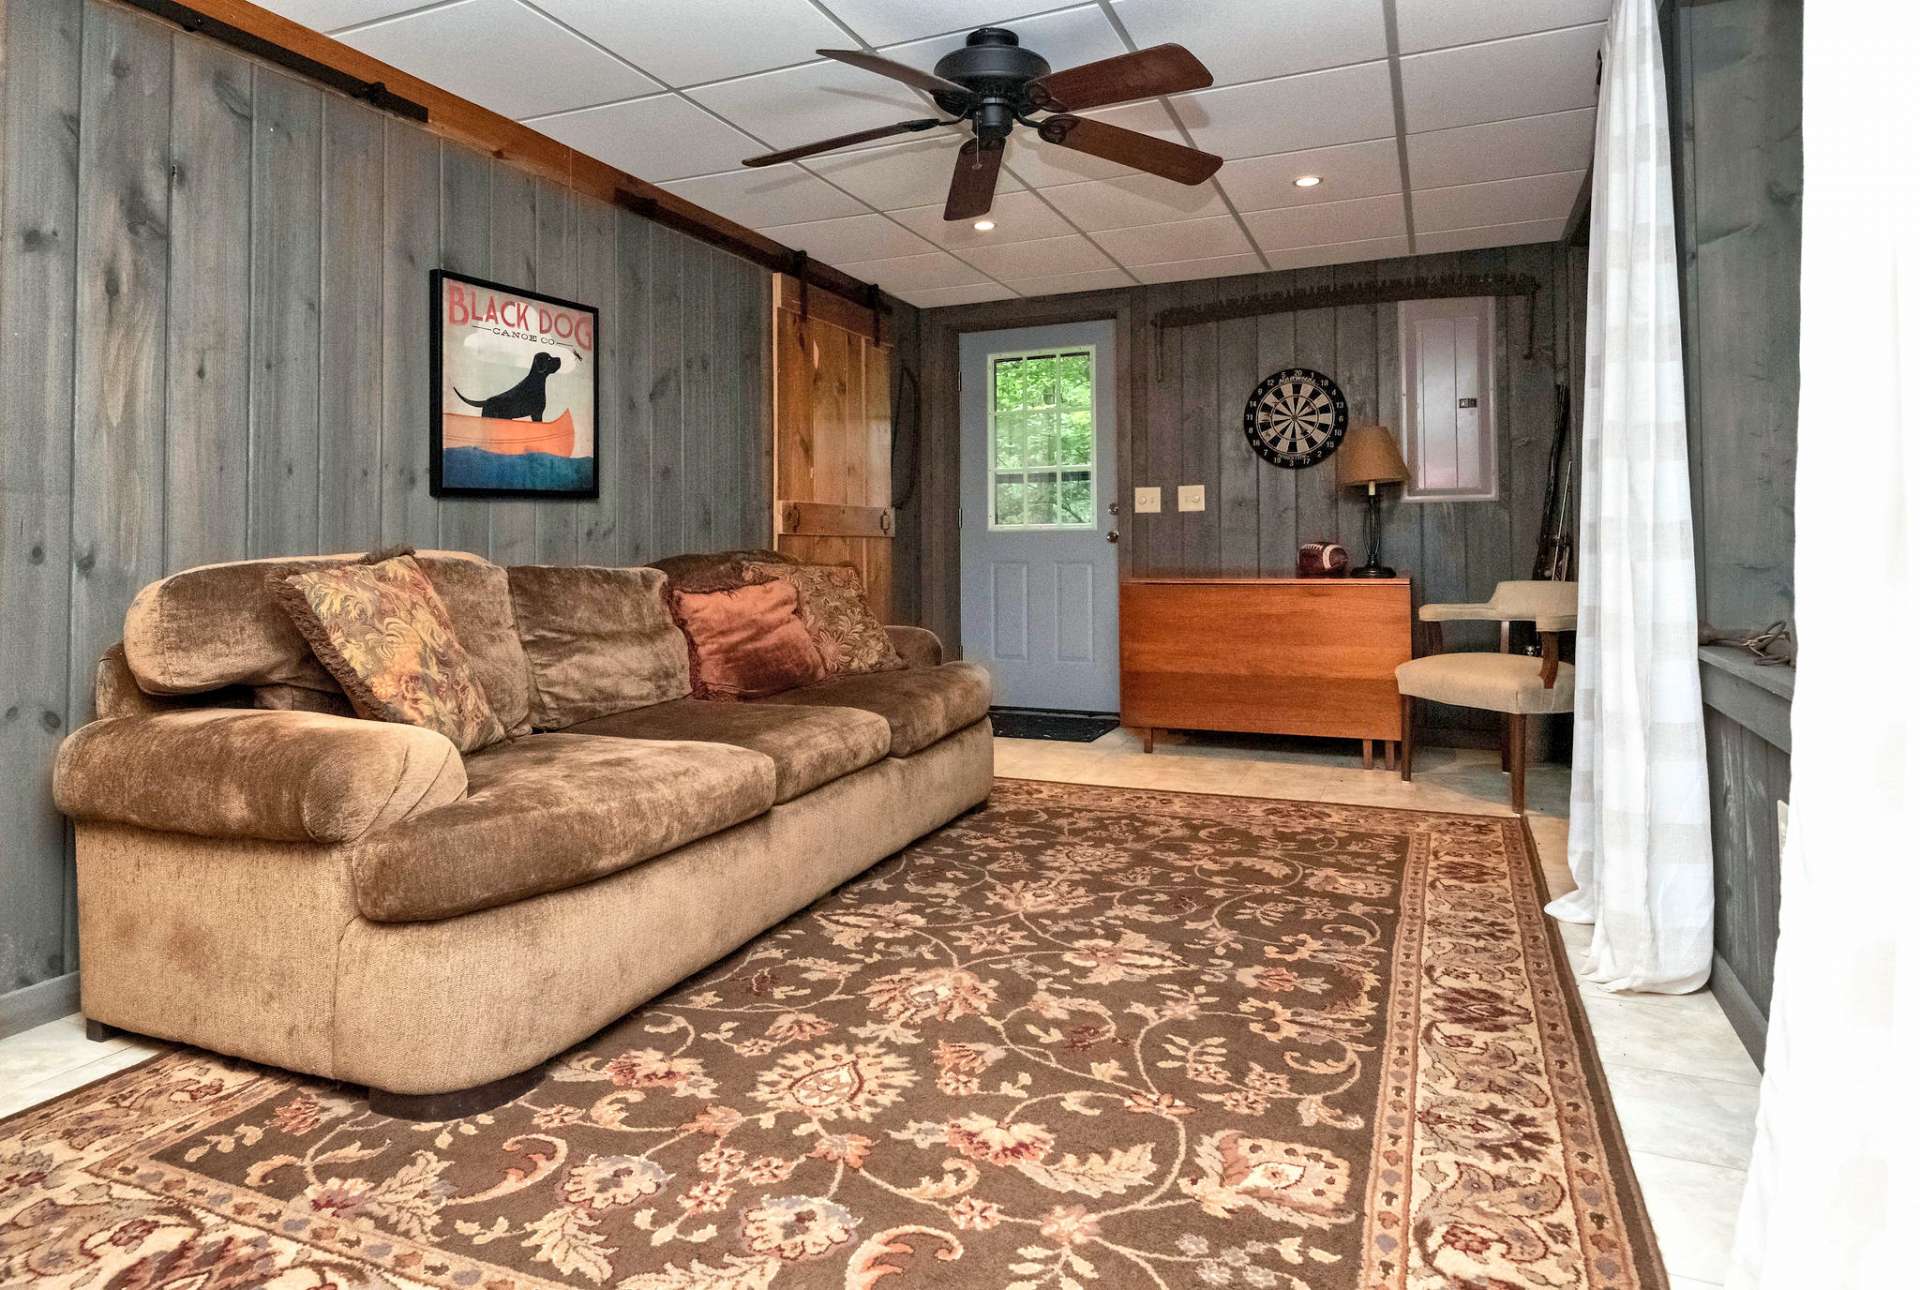 Den on the lower level offers additional space for a sleeping area or just spread out and enjoy your cabin on the creek.